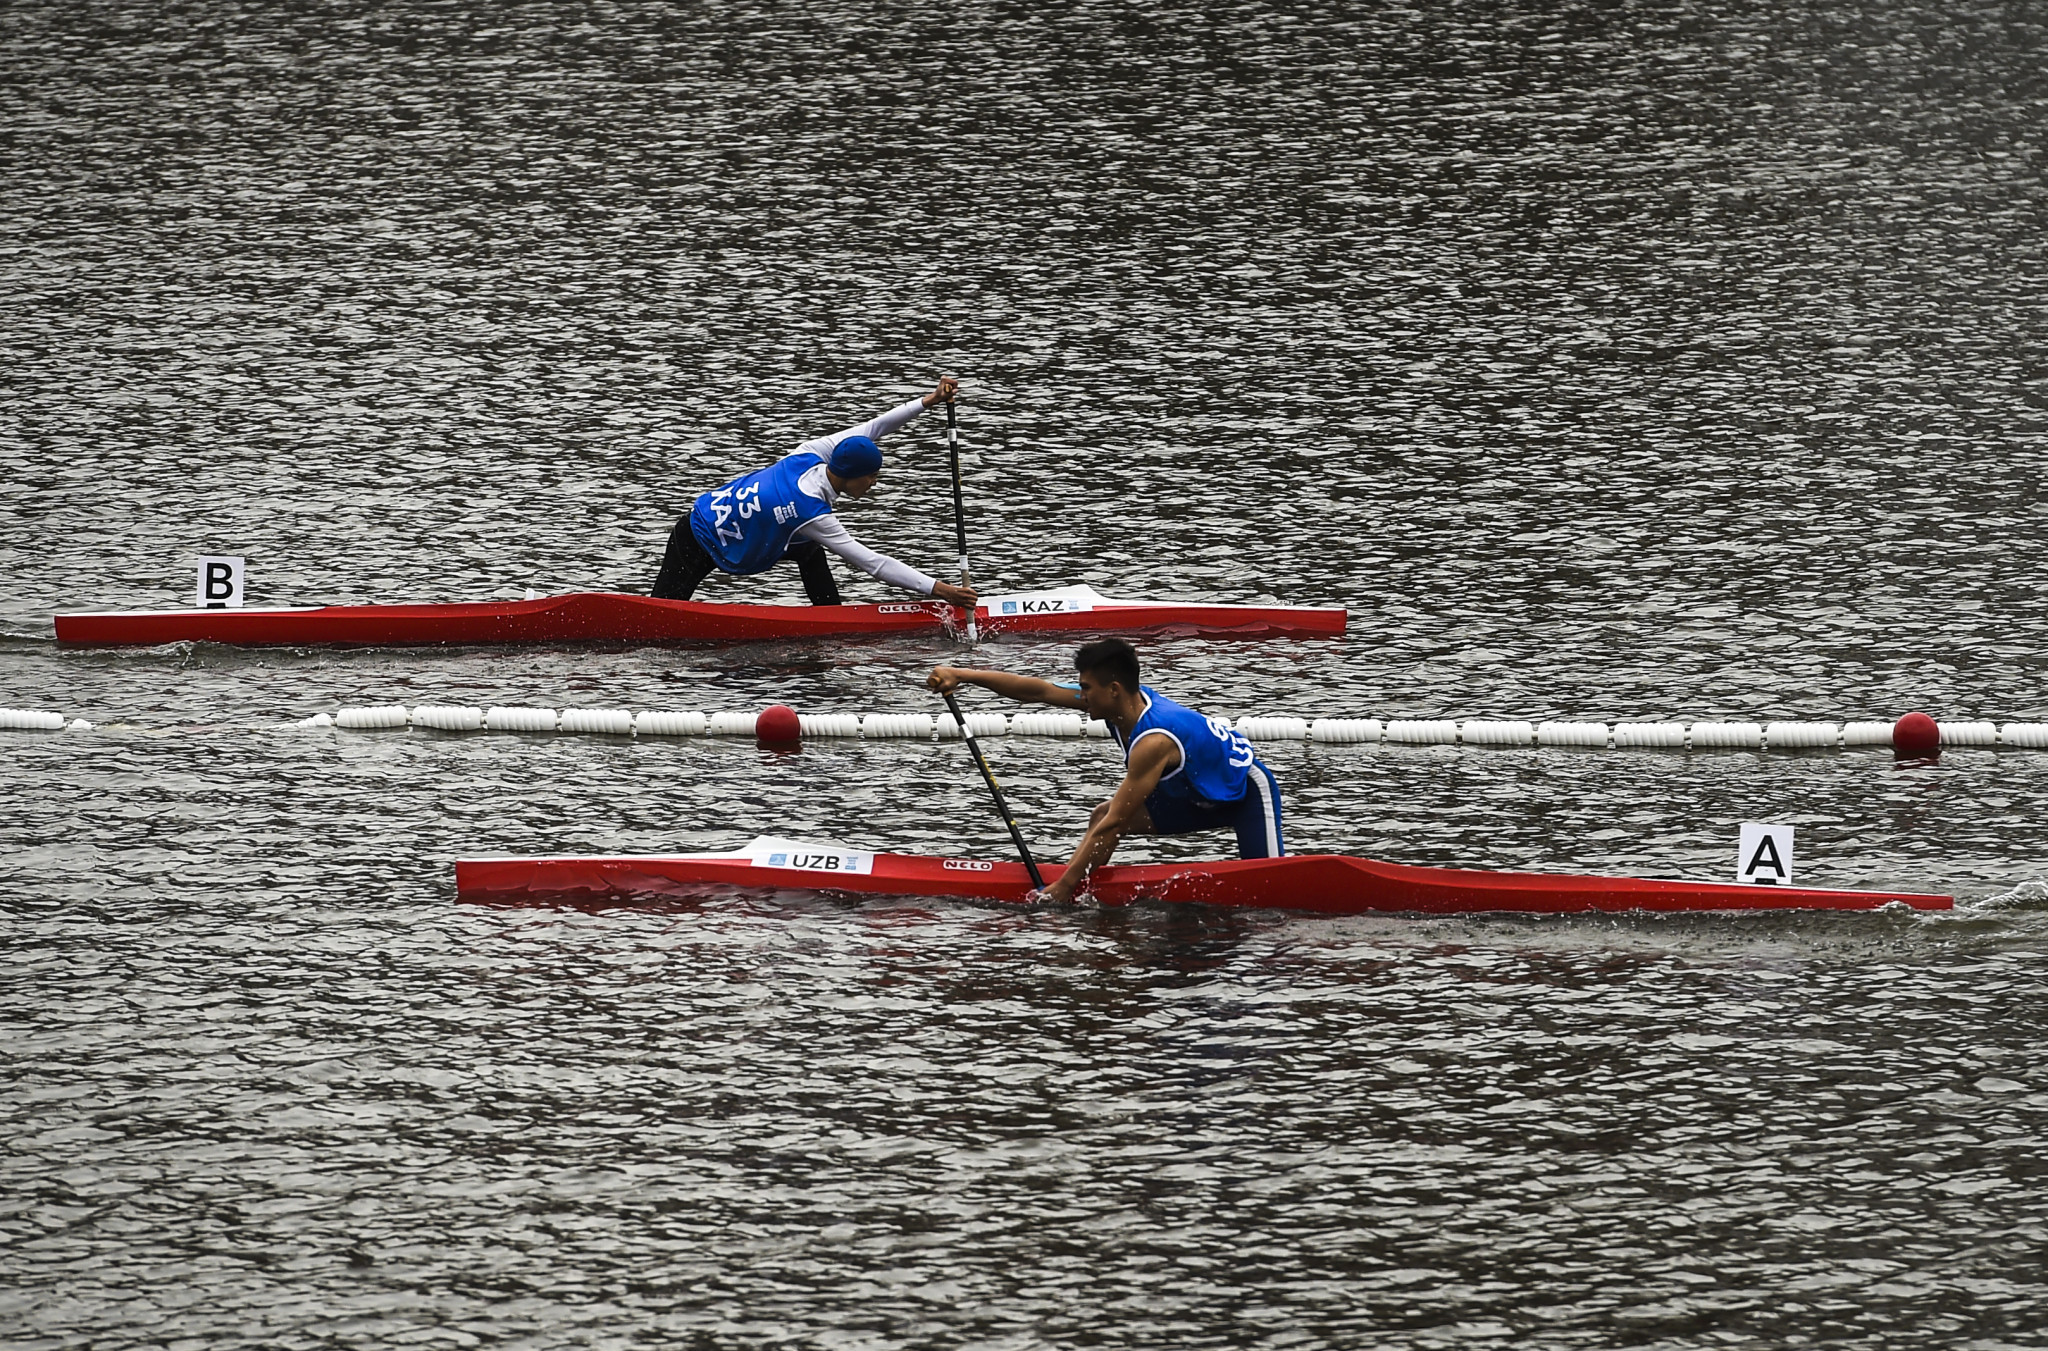 Six disciplines of canoe sprint are expected to be competed in at the Asian Canoe Sprint Championships ©Getty Images